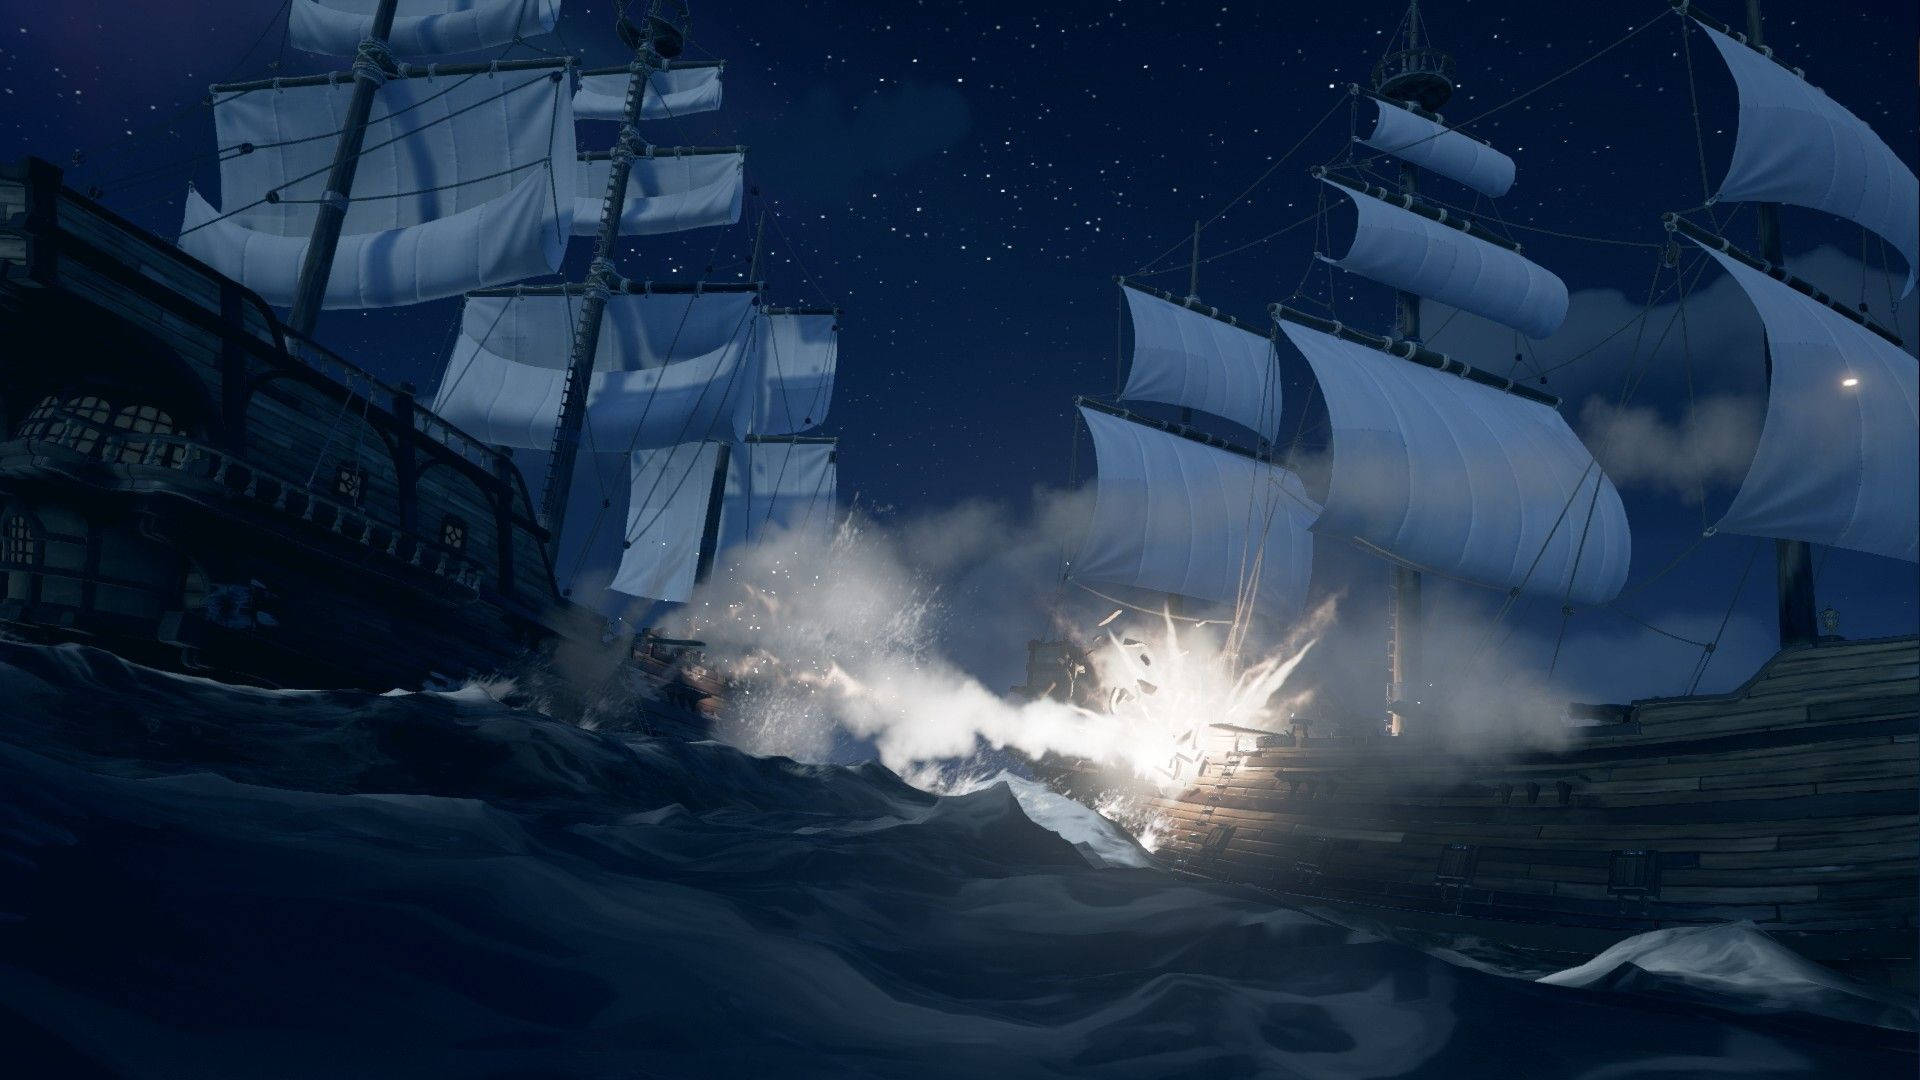 A Battle at Sea - Prepare for Engagement Wallpaper